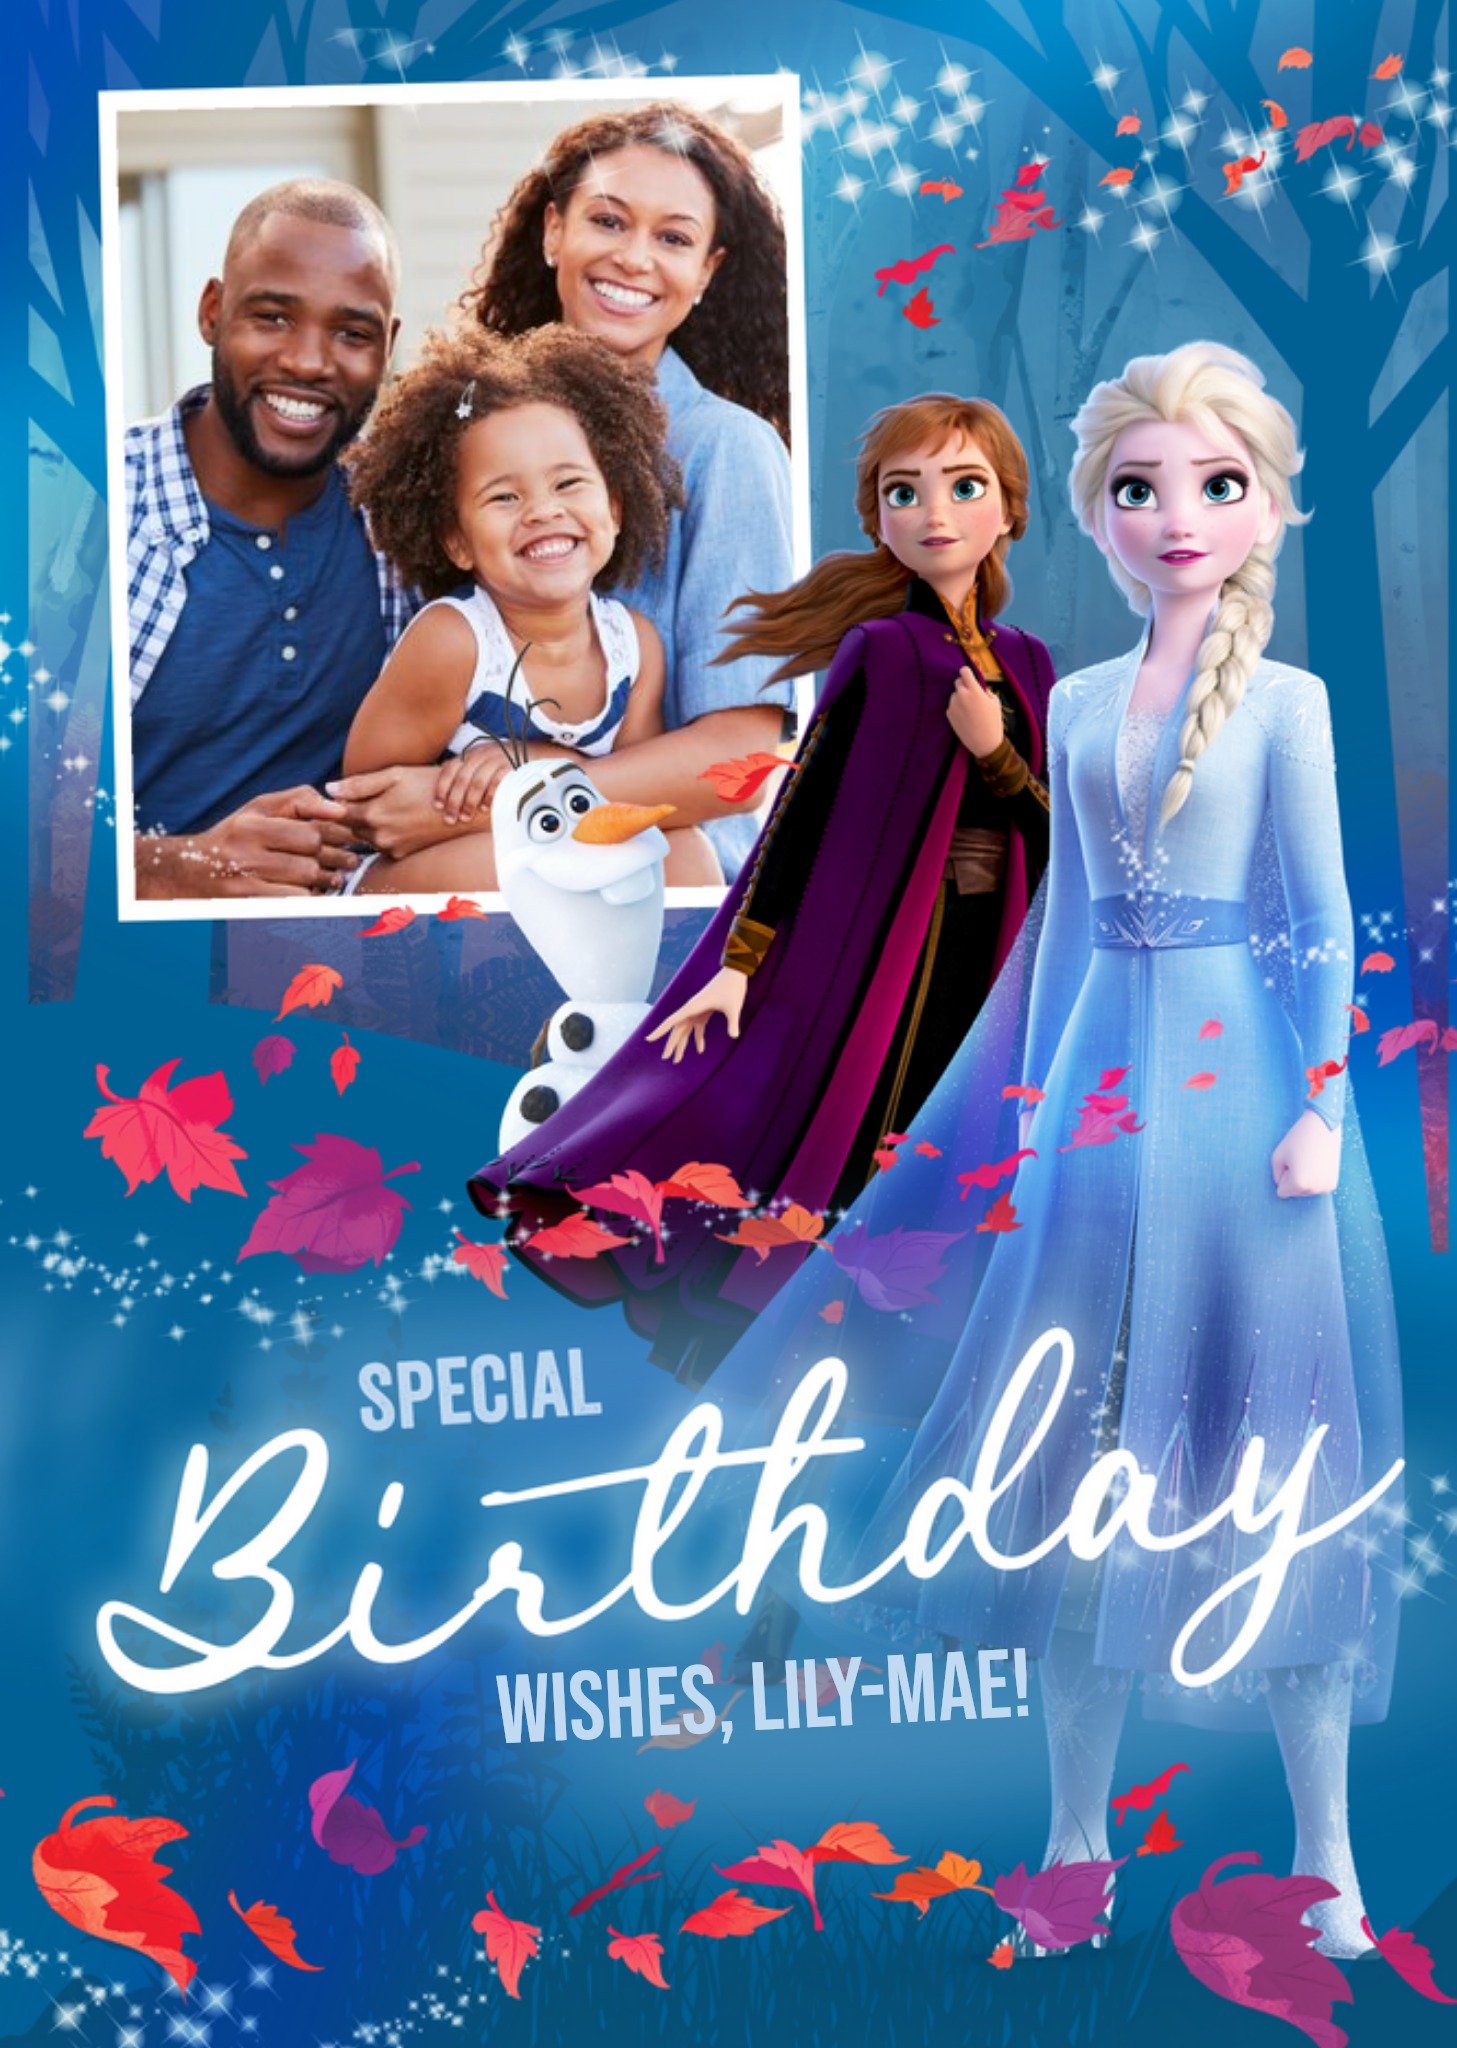 Disney Frozen 2 Magical Photo Upload Special Birthday Wishes Card, Large